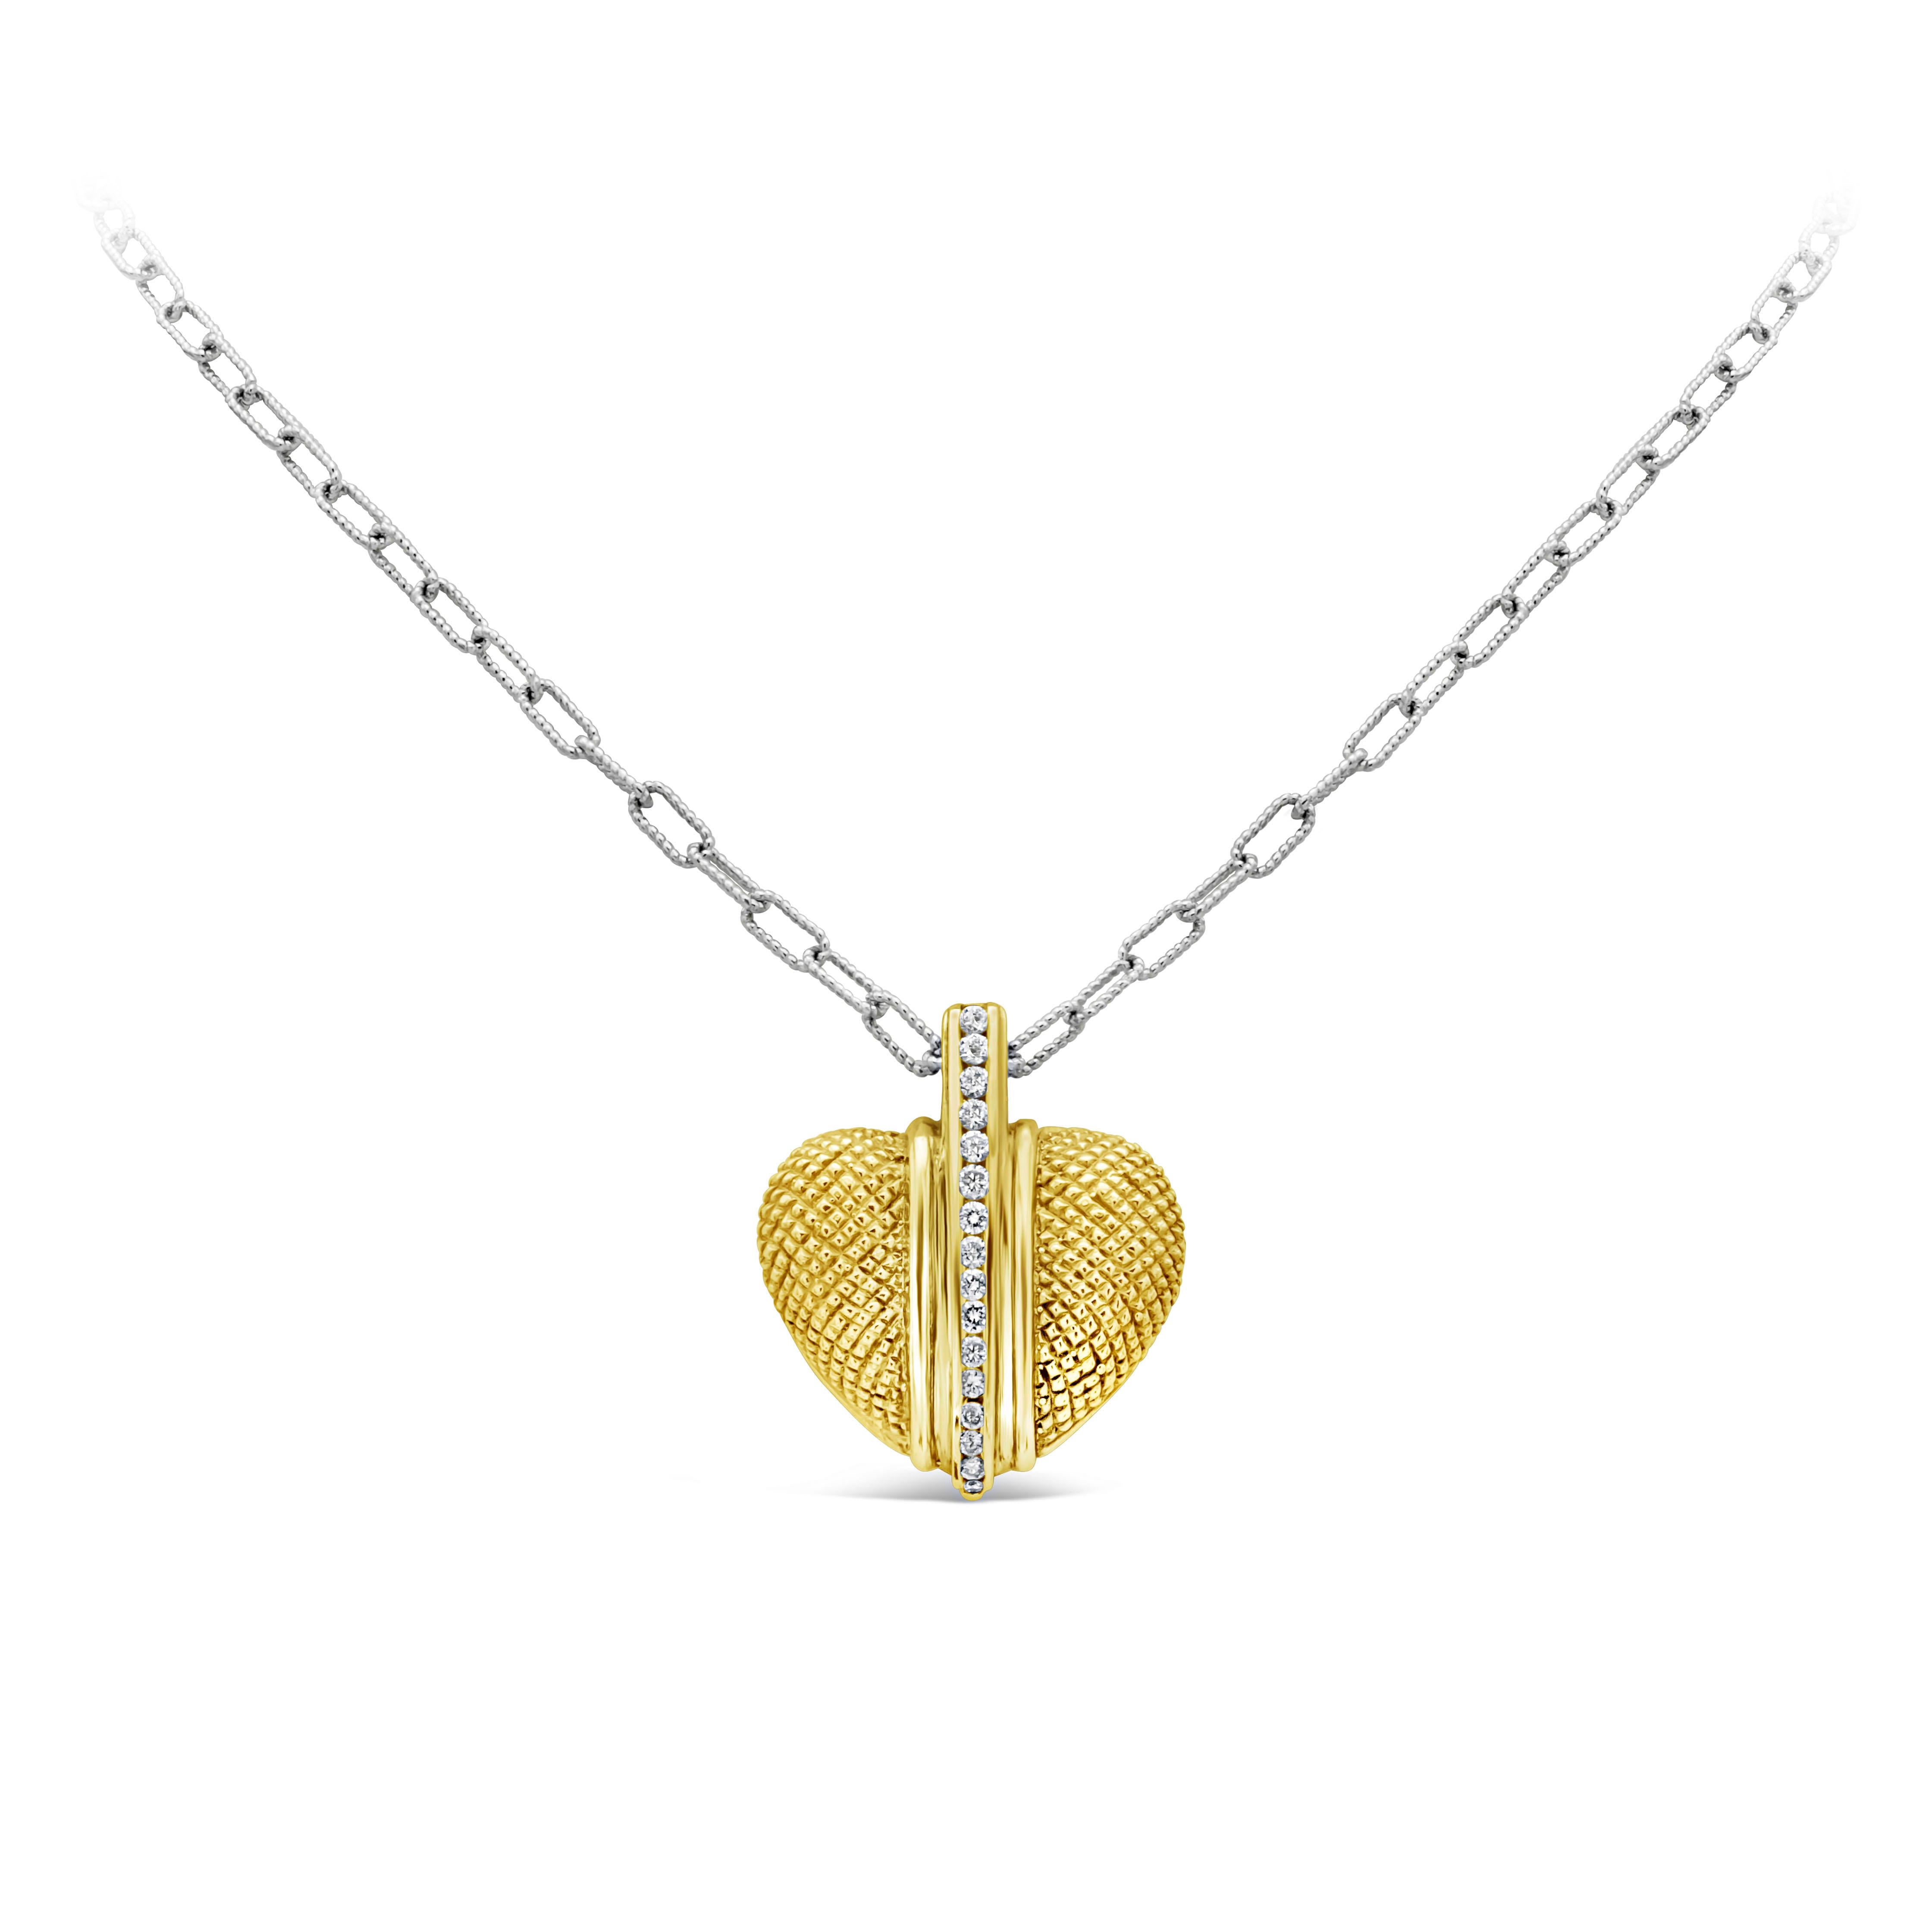 Showcasing a Judith Ripka heart shape pendant necklace accented with 16 brilliant round shape diamond in the center weighing 0.45 carats total. Suspended on an adjustable 18 inch link chain (sold separetly) and Finely made in 18k Yellow Gold.